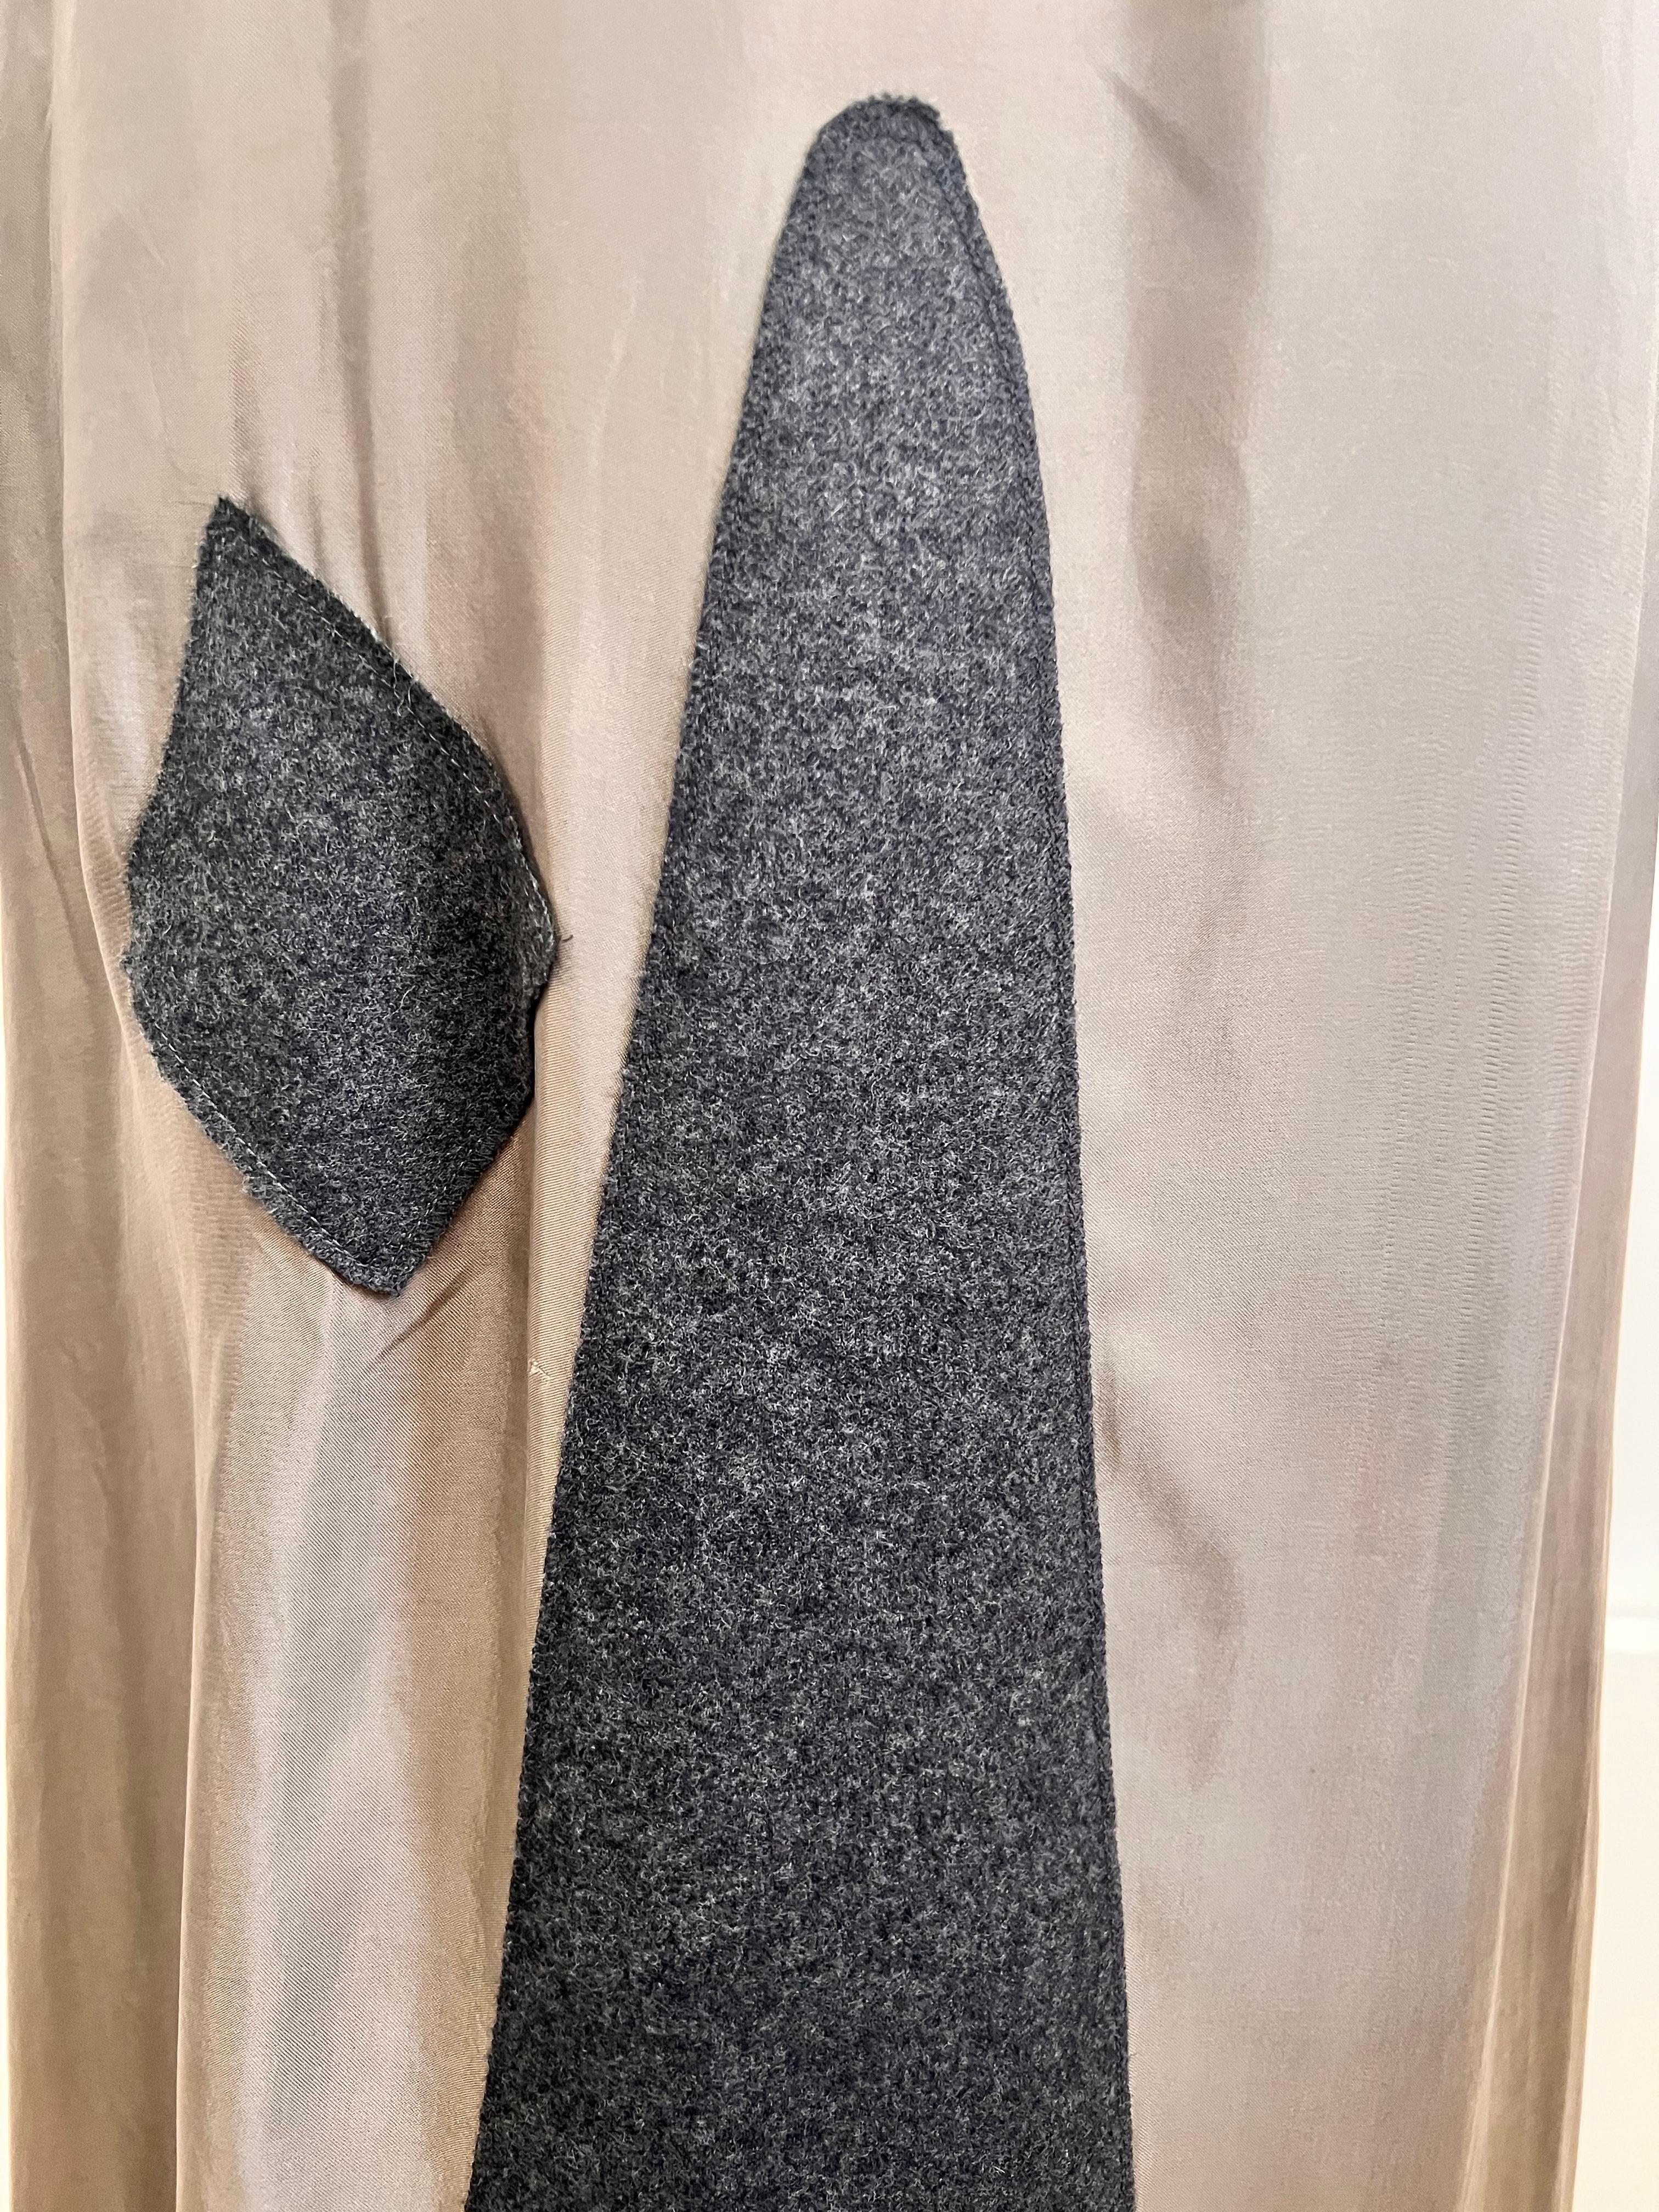 Vintage 1990’s Martin Margiela A line long deconstructed dress with felt patches In Good Condition For Sale In COLLINGWOOD, AU